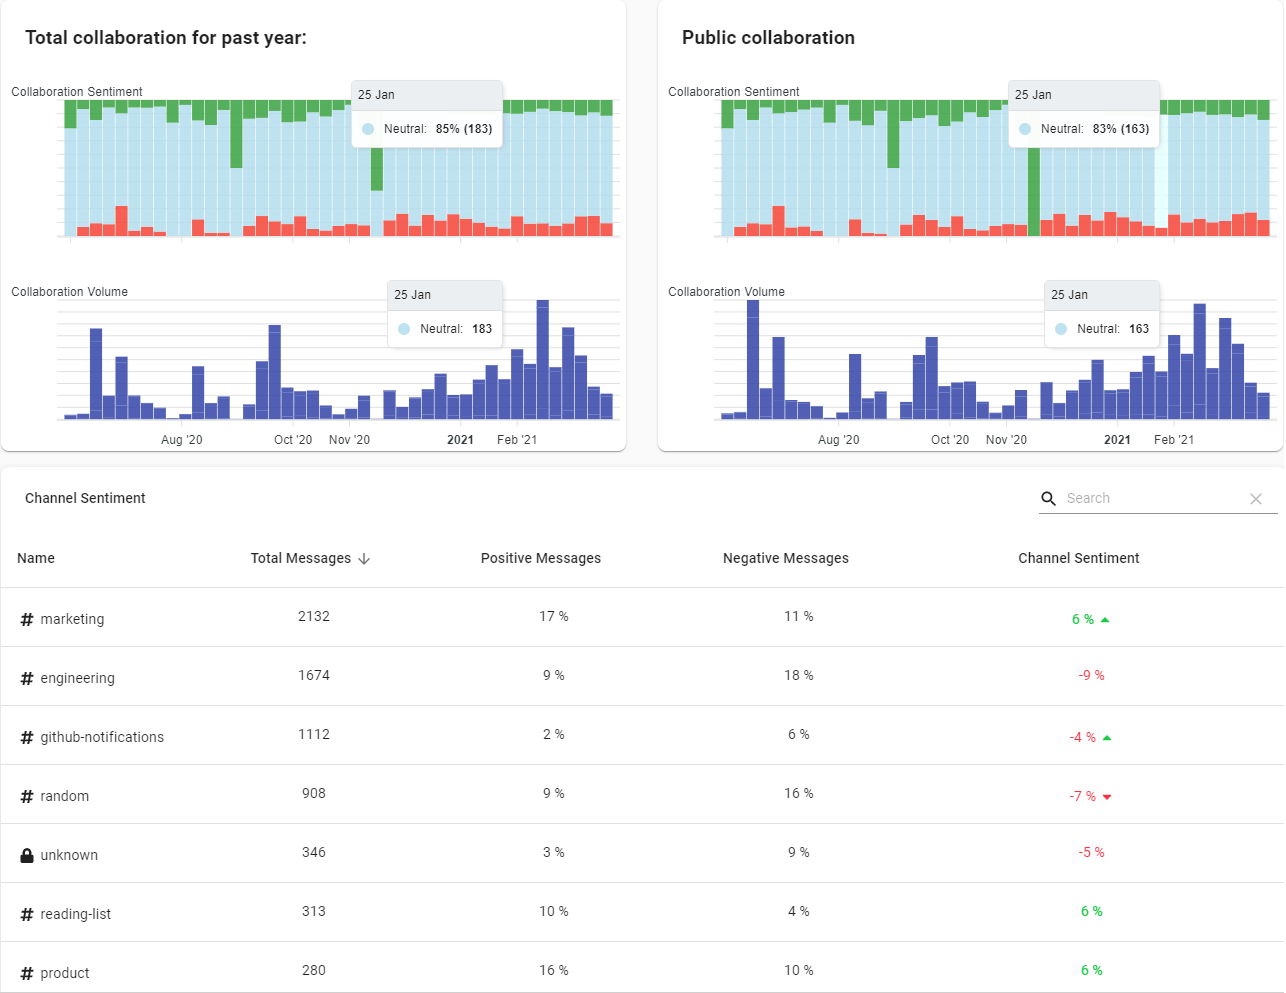 Company, team, and channel sentiment analytics